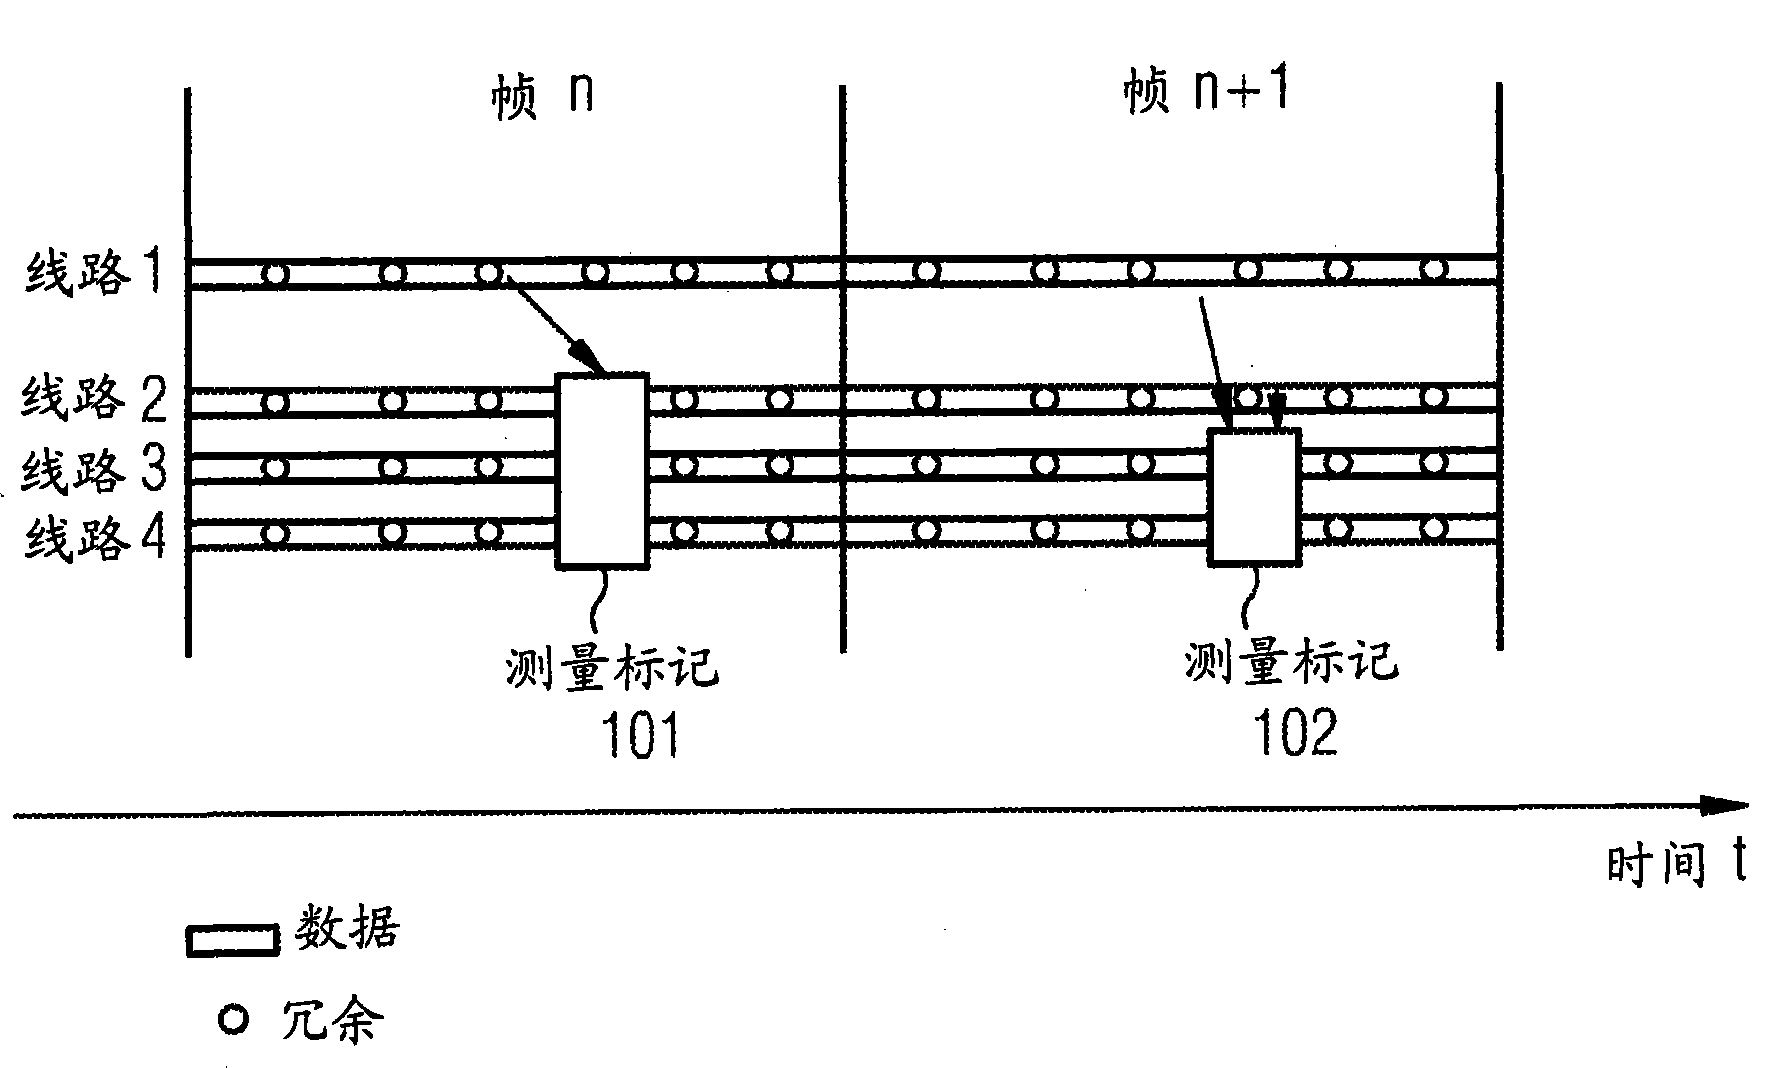 Method and device for processing data and communication system comprising such device